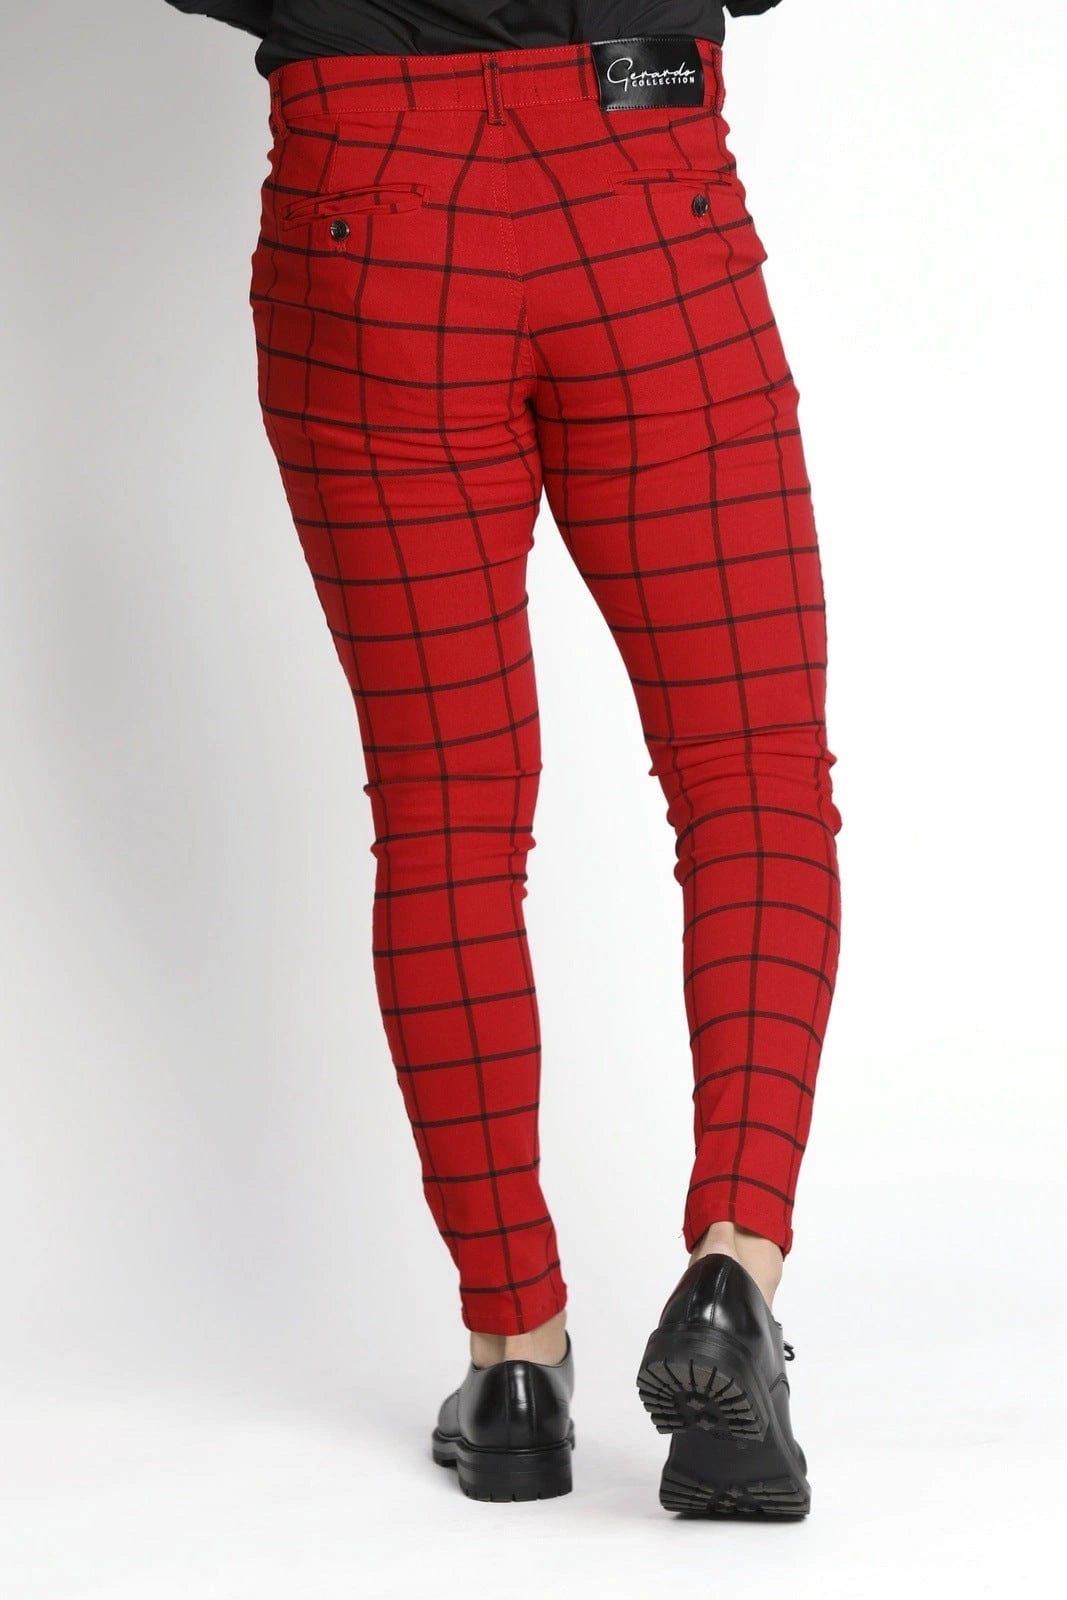 Get Red Checkered Flared Pants at ₹ 949 | LBB Shop